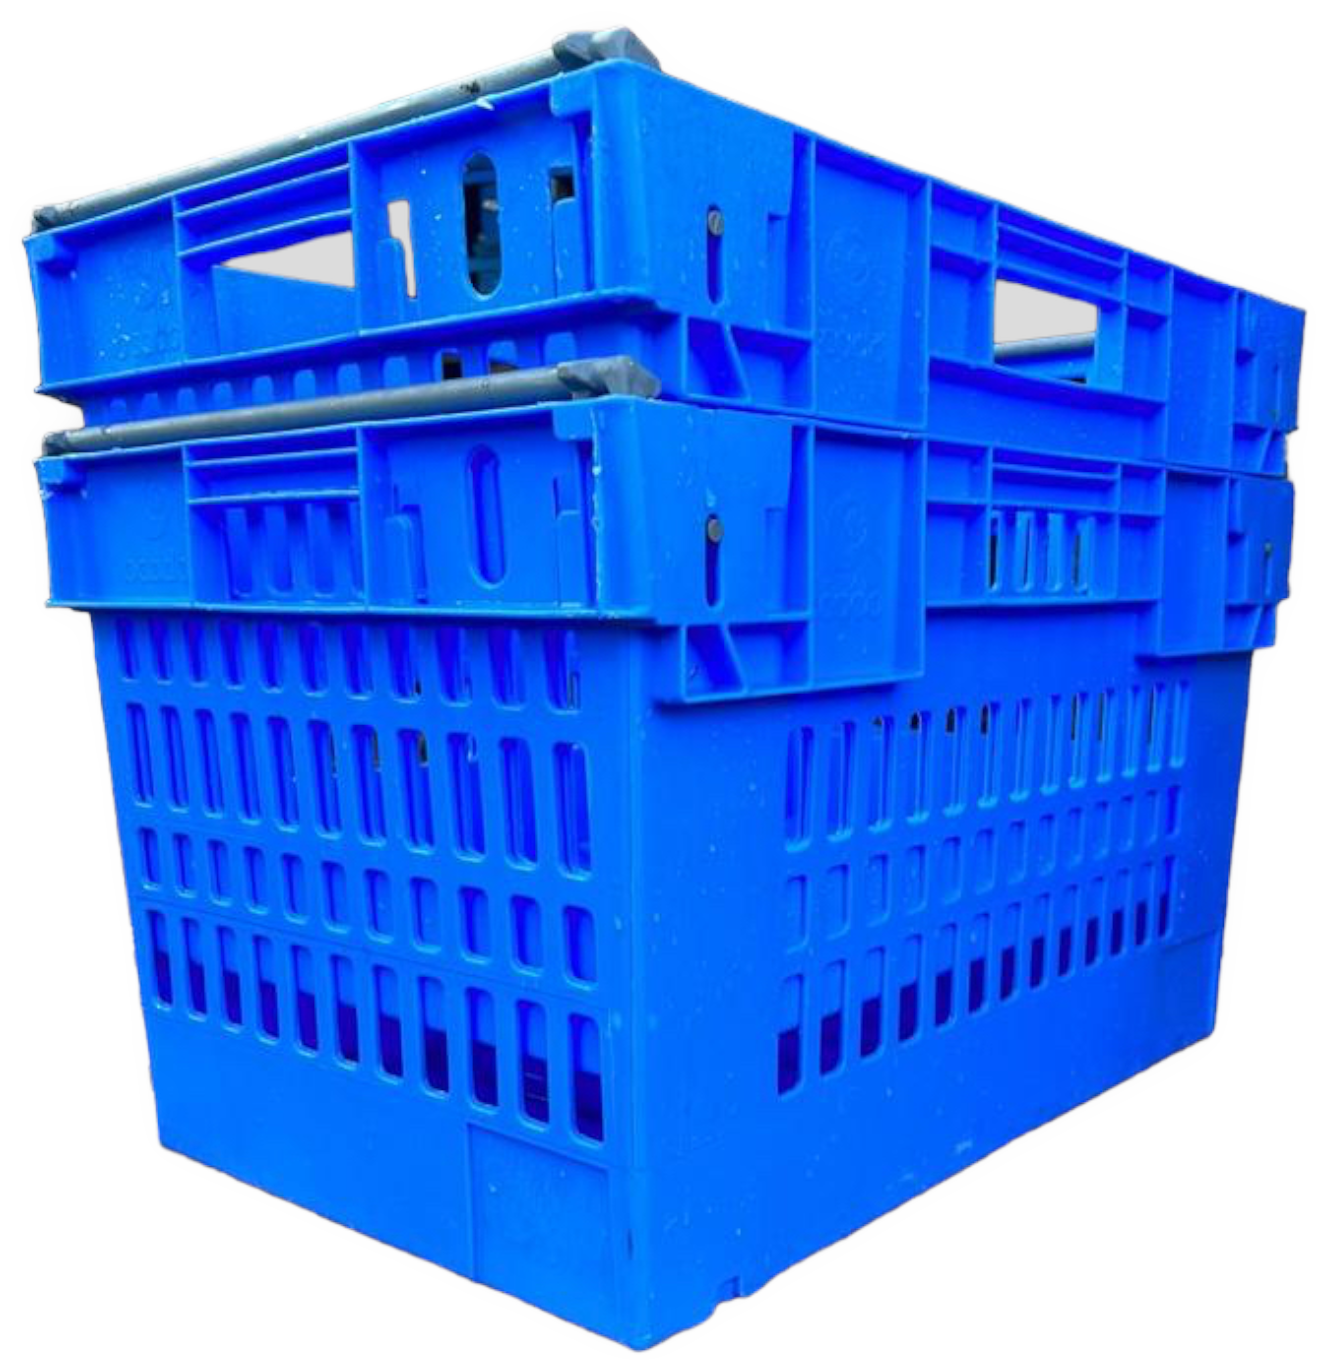 400x300x185 Bale Arm Crate Black 15LTR - Pack of 14 For Commercial Industry